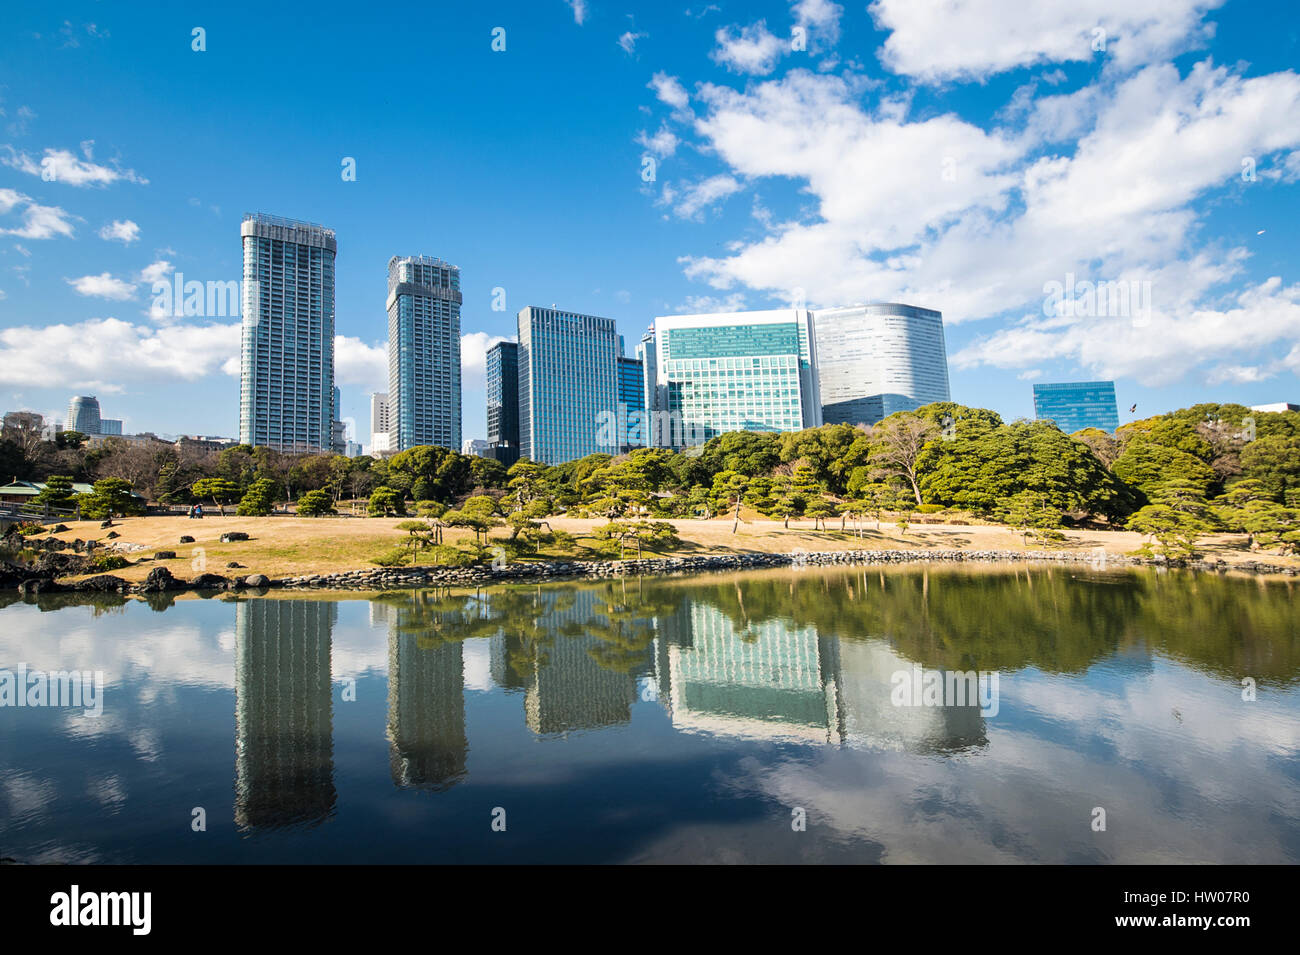 Old and modern architecture. 30 December 2016 Photo taken at the Hamarikyu Gardens, a public park in Tokyo, Japan. Located at the mouth of the Sumida  Stock Photo